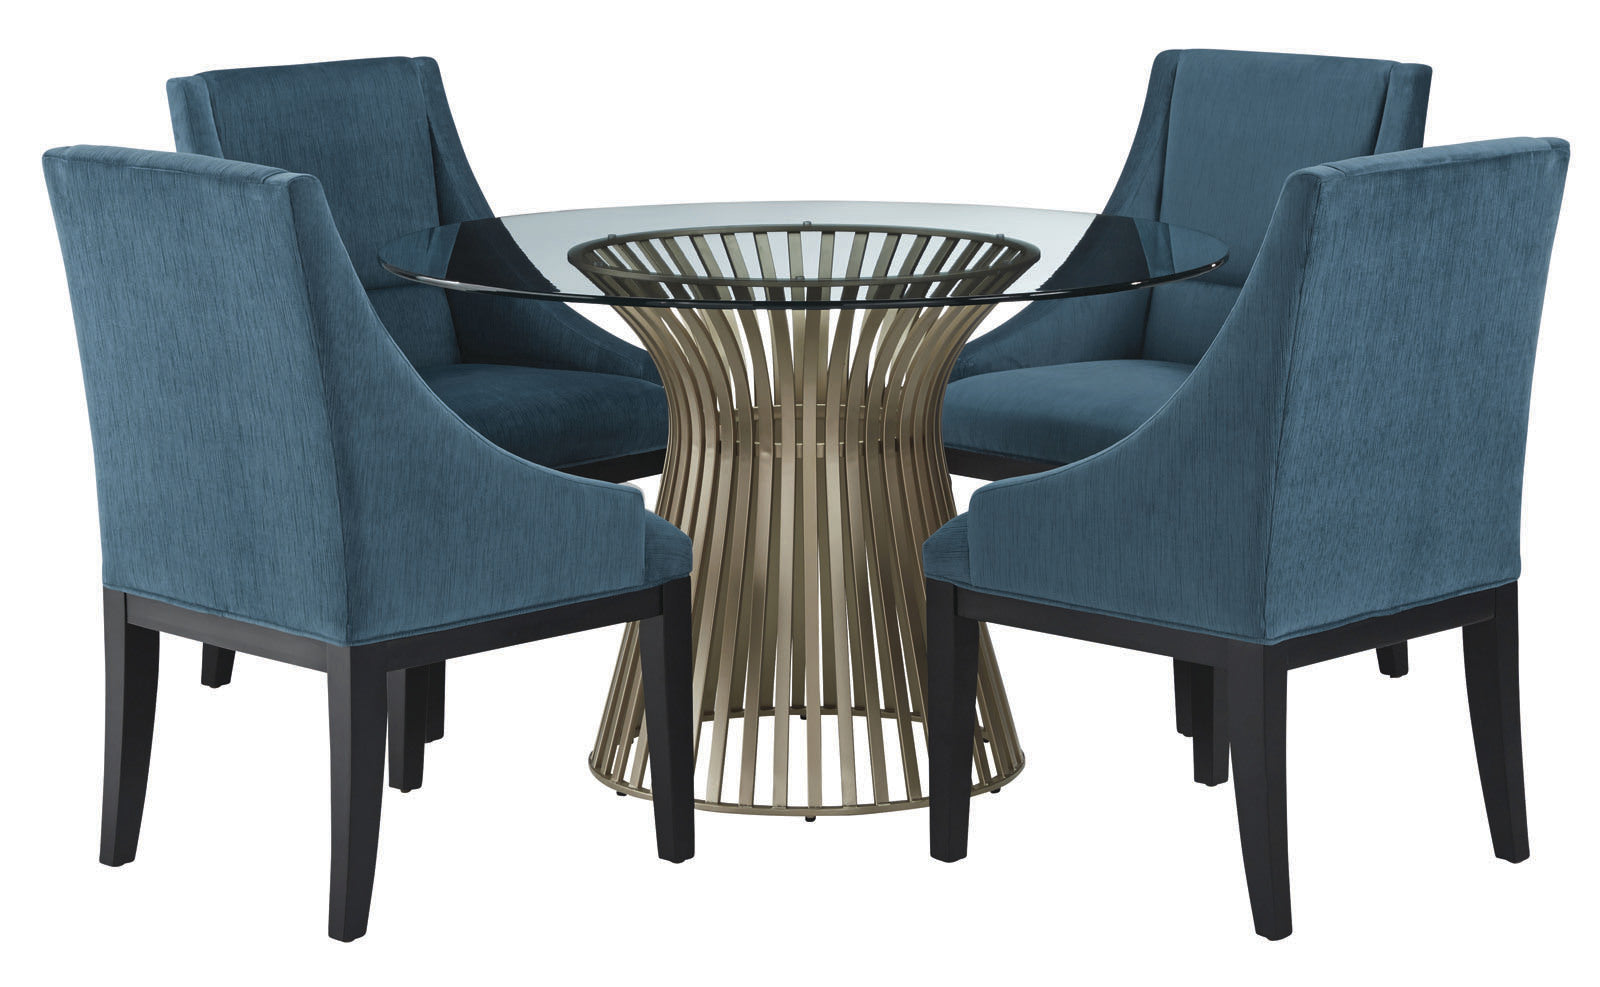 Palliser Furniture Mix and Match Naomi Round Dining Table with Gold Base and 4 Diana Wing Chair Dining Set in Dark Teal 119-155GG54 image